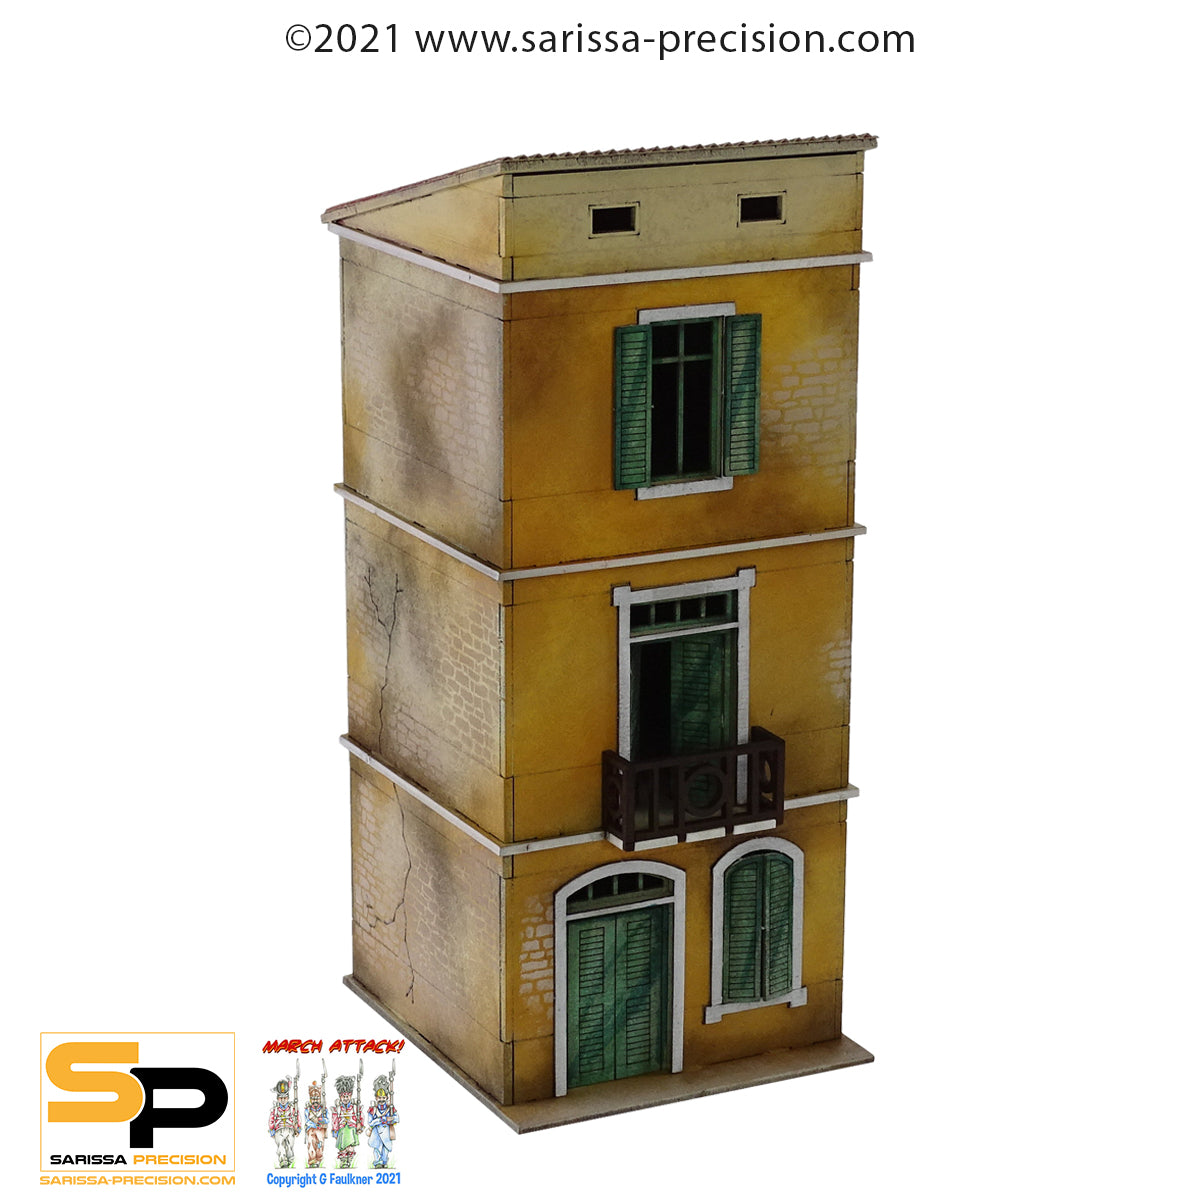 Mediterranean Small House - 3 Floors with Balcony and Sloped Roof